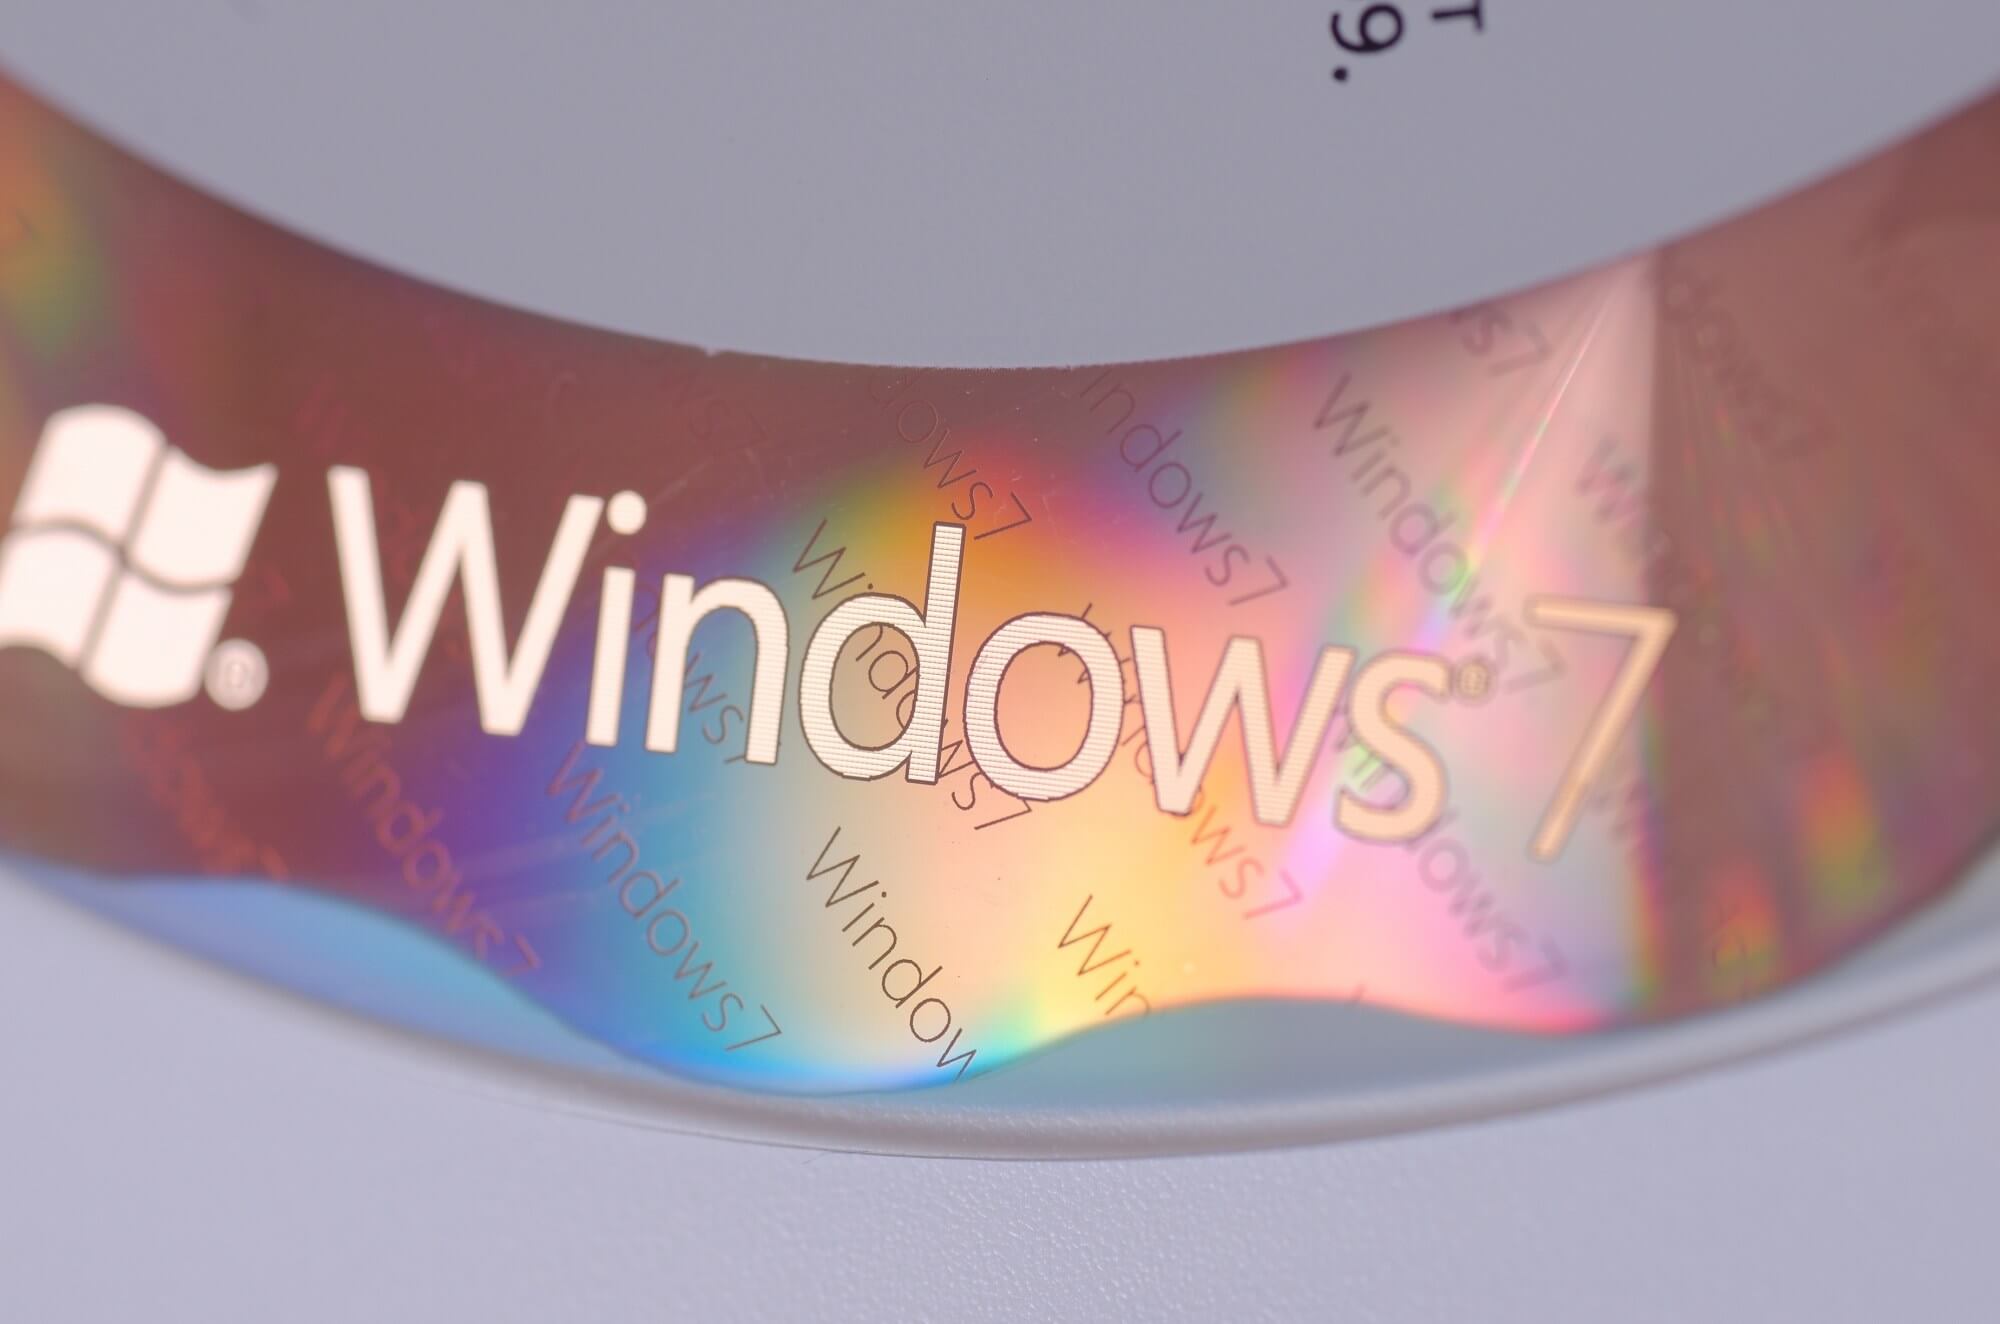 Windows 7 users to receive notifications about end of support date, encouraged to upgrade